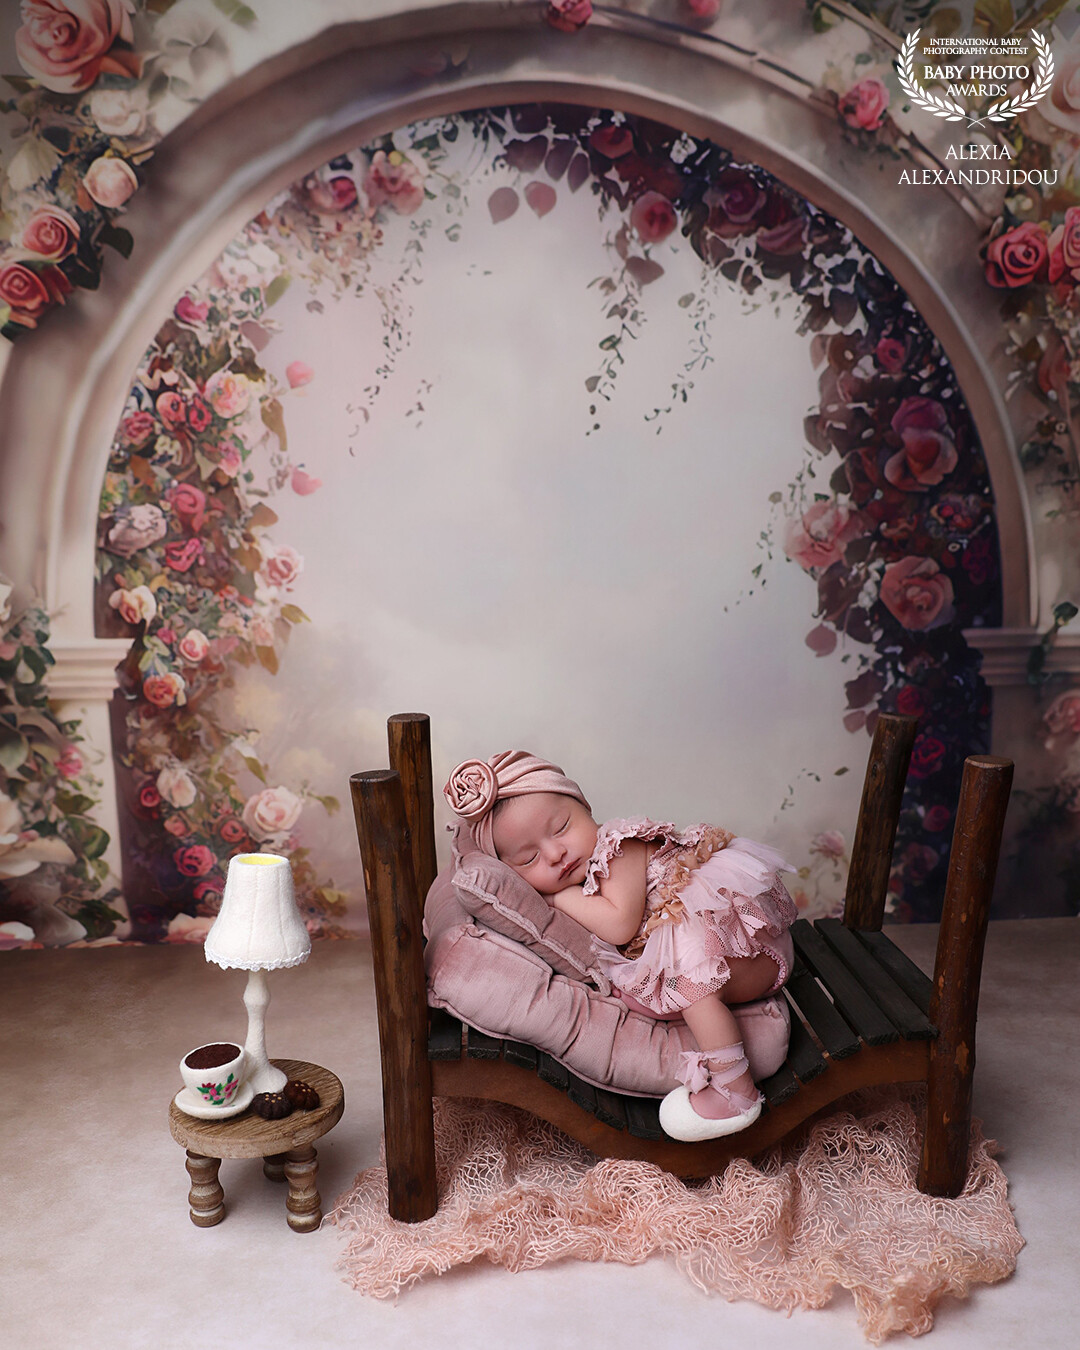 Whimsical dreams meet tiny toes in this enchanting setup for this newborn baby girl photo session. Every frame tells a tale of pure sweetness and delicate wonder.